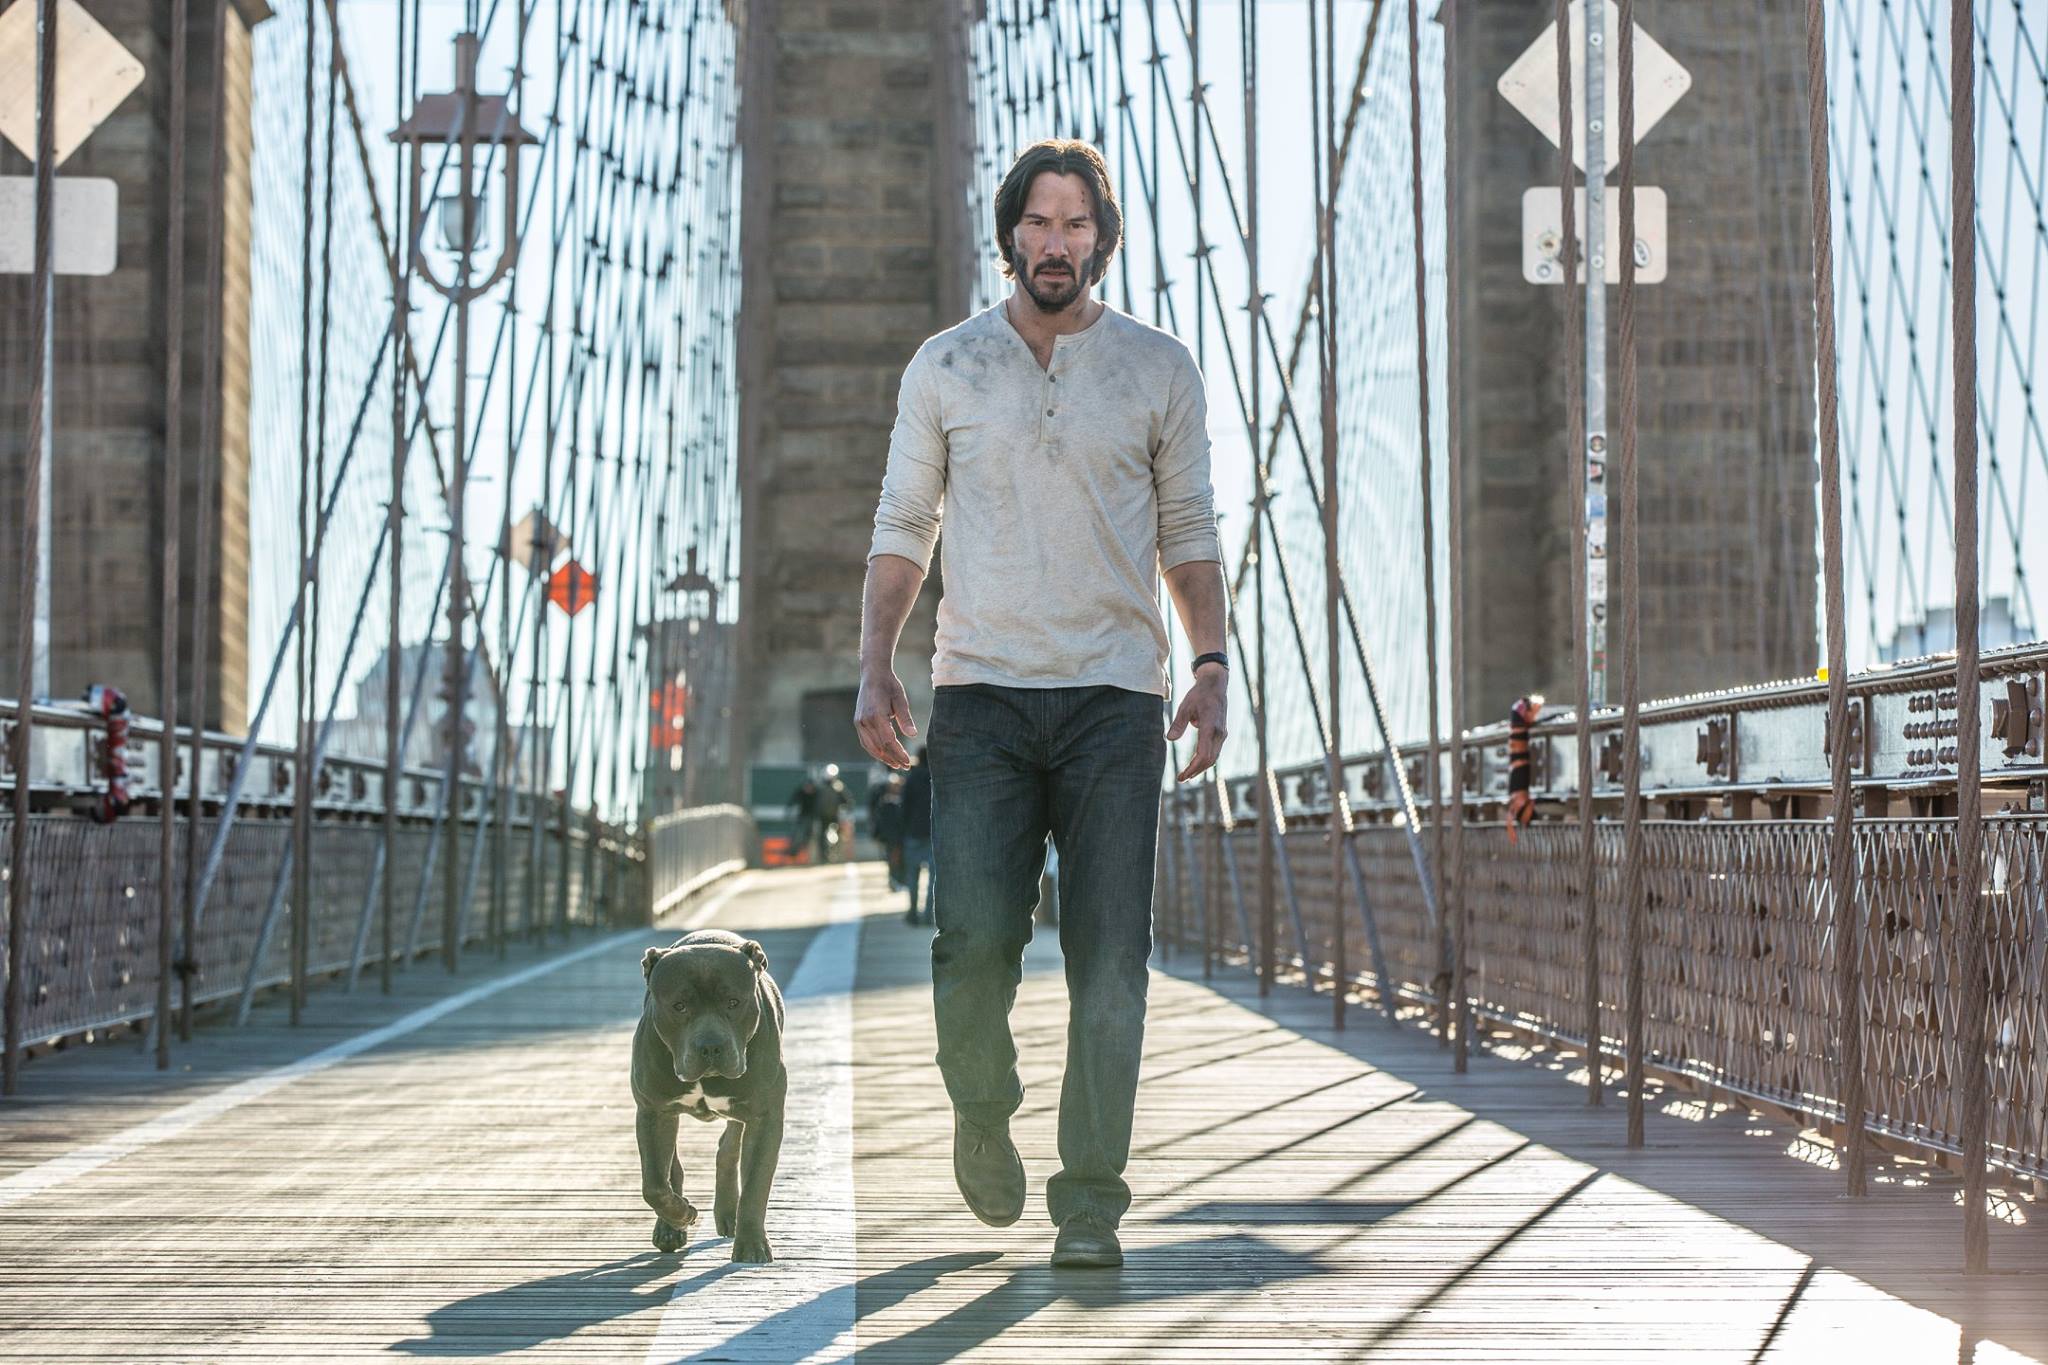 John Wick has a new dog, and boy is he angry.